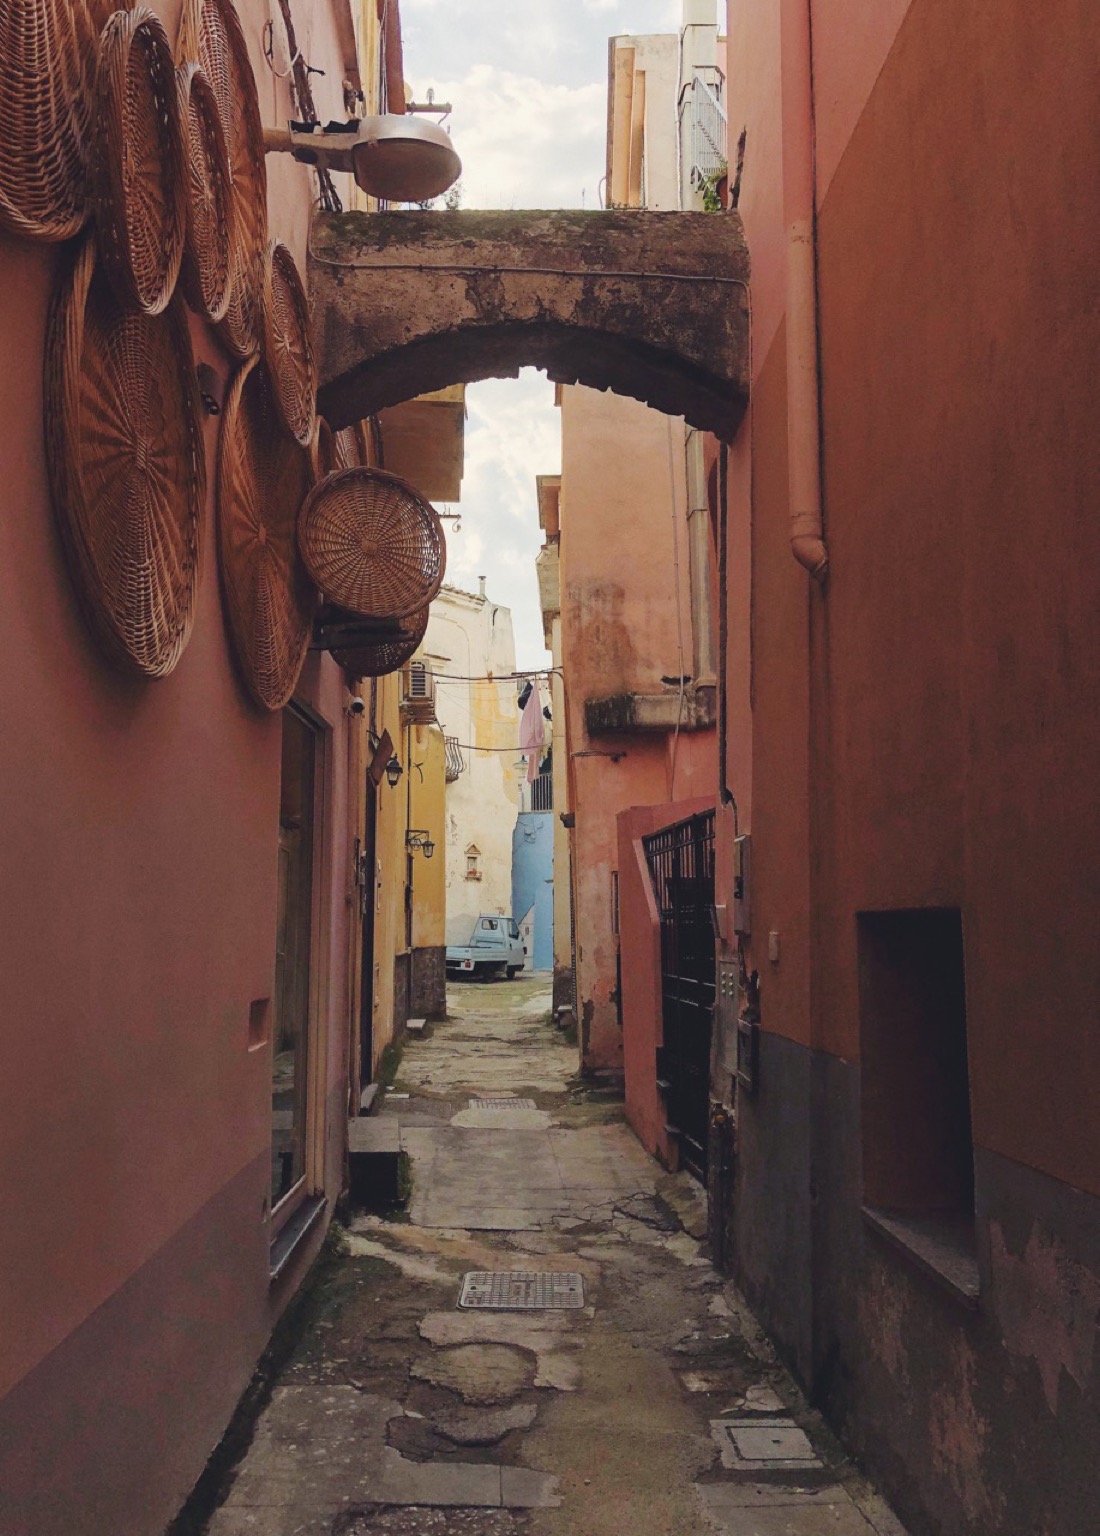 A narrow alley in Naples. Walls are orange and yellow and a small blue car is parked on the end of it.